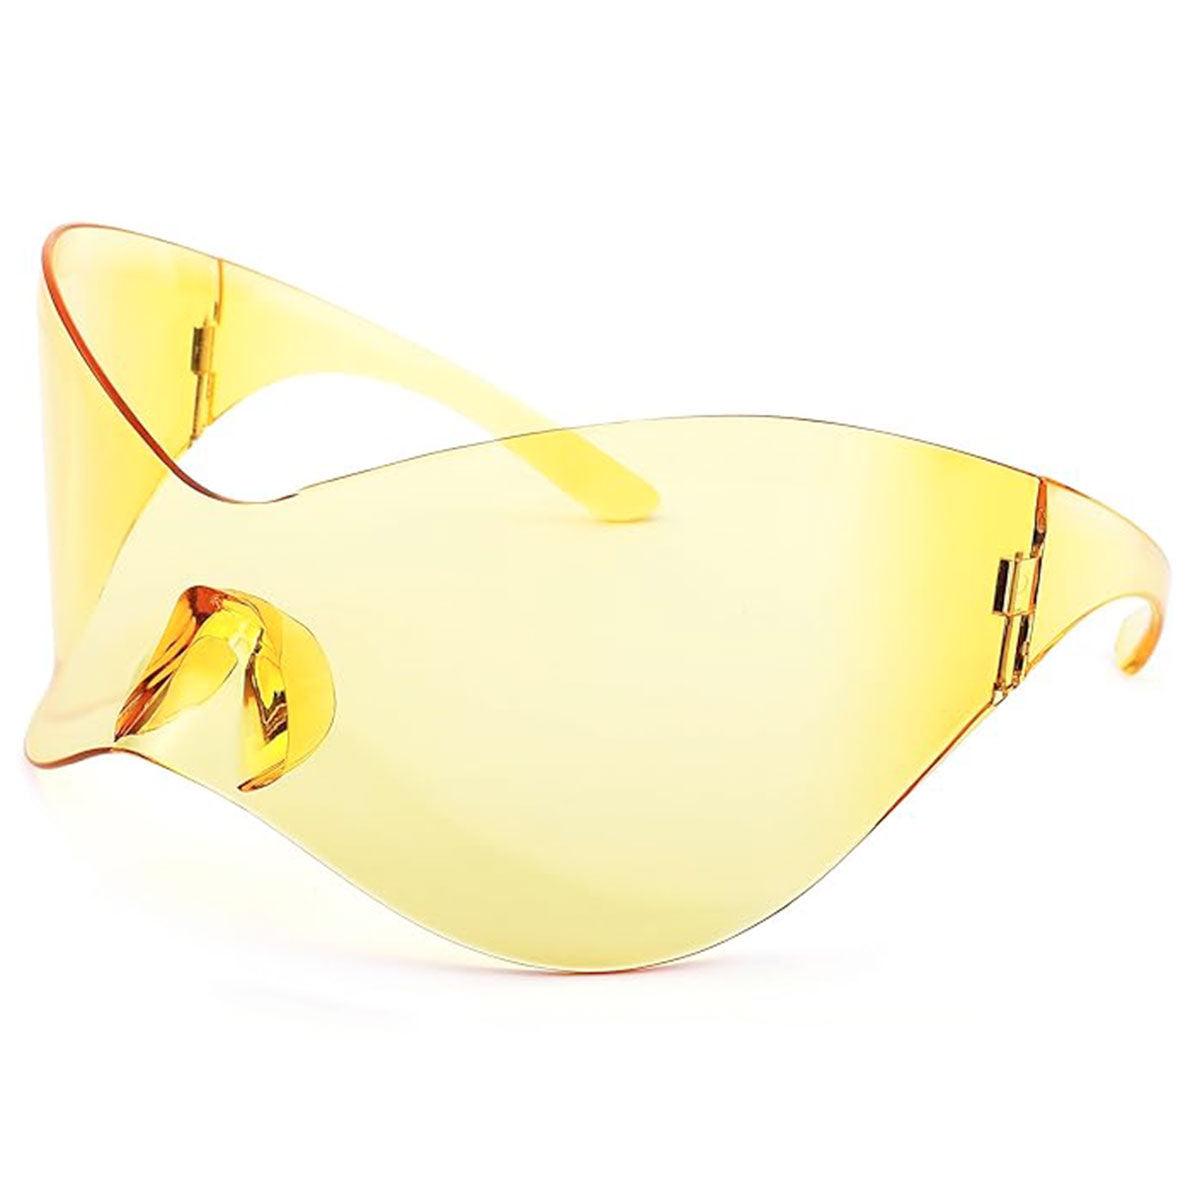 Shop Women's Yellow Oversized Shield Visor Sunglasses for a Bold Look